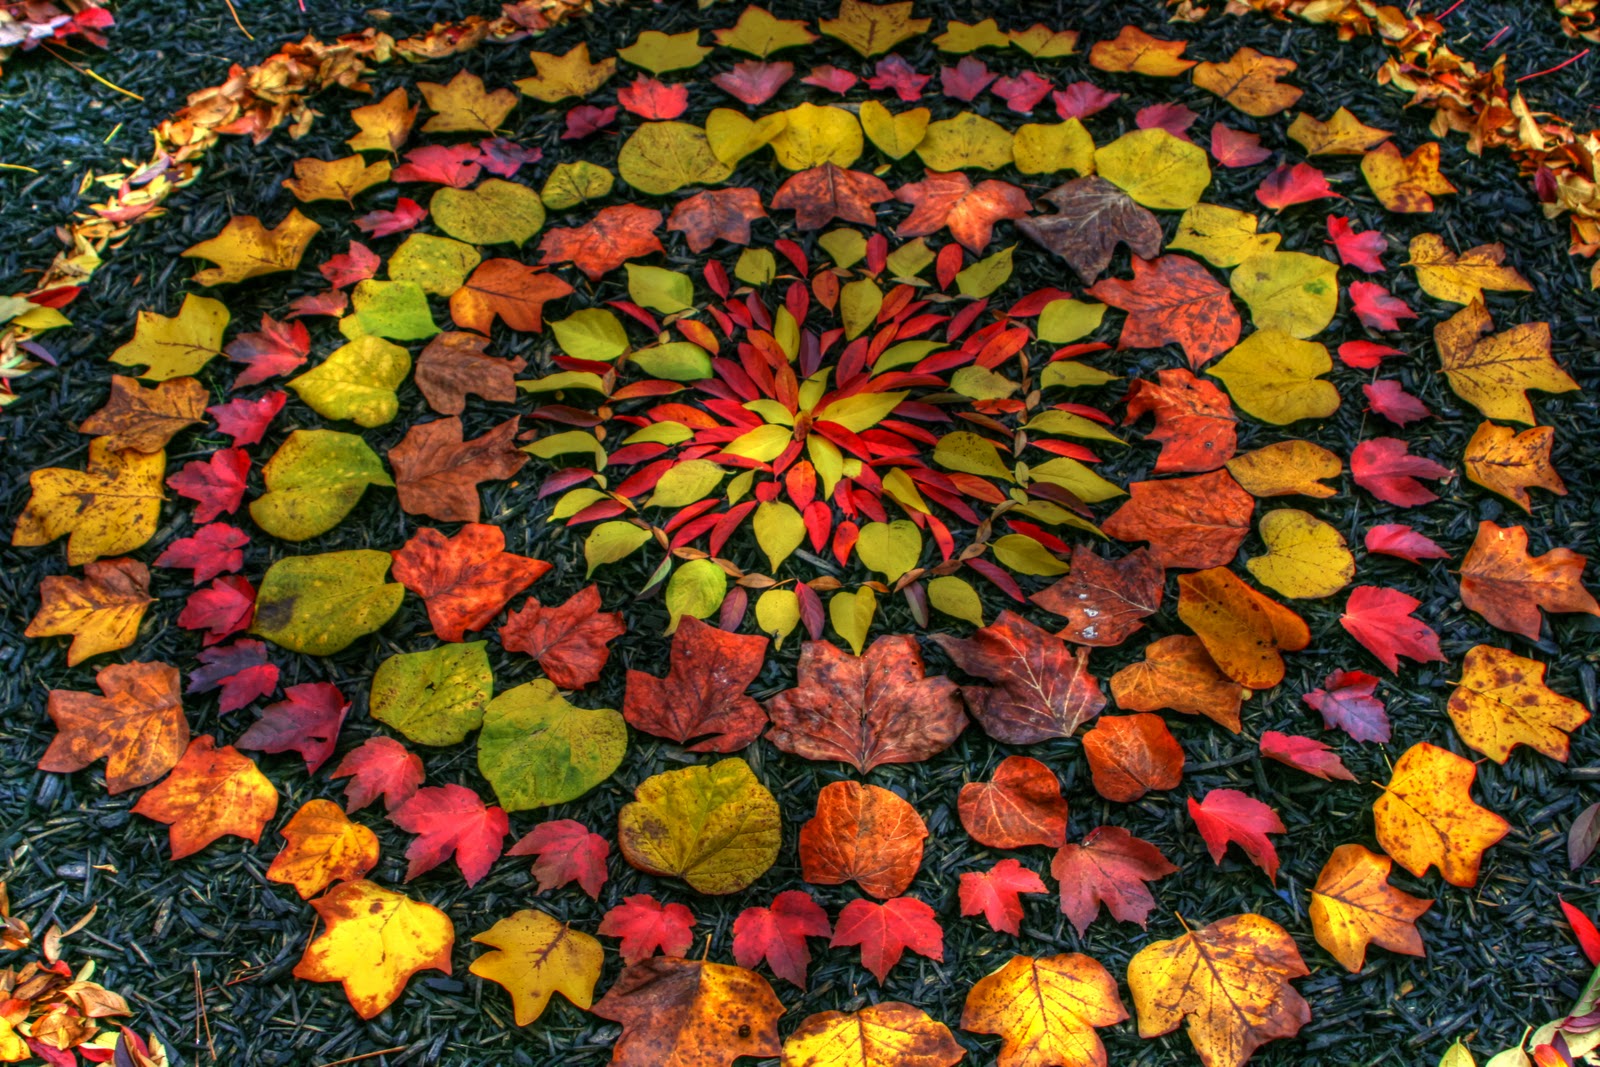 Natural sculptures by Andy Goldsworthy | USA Art News